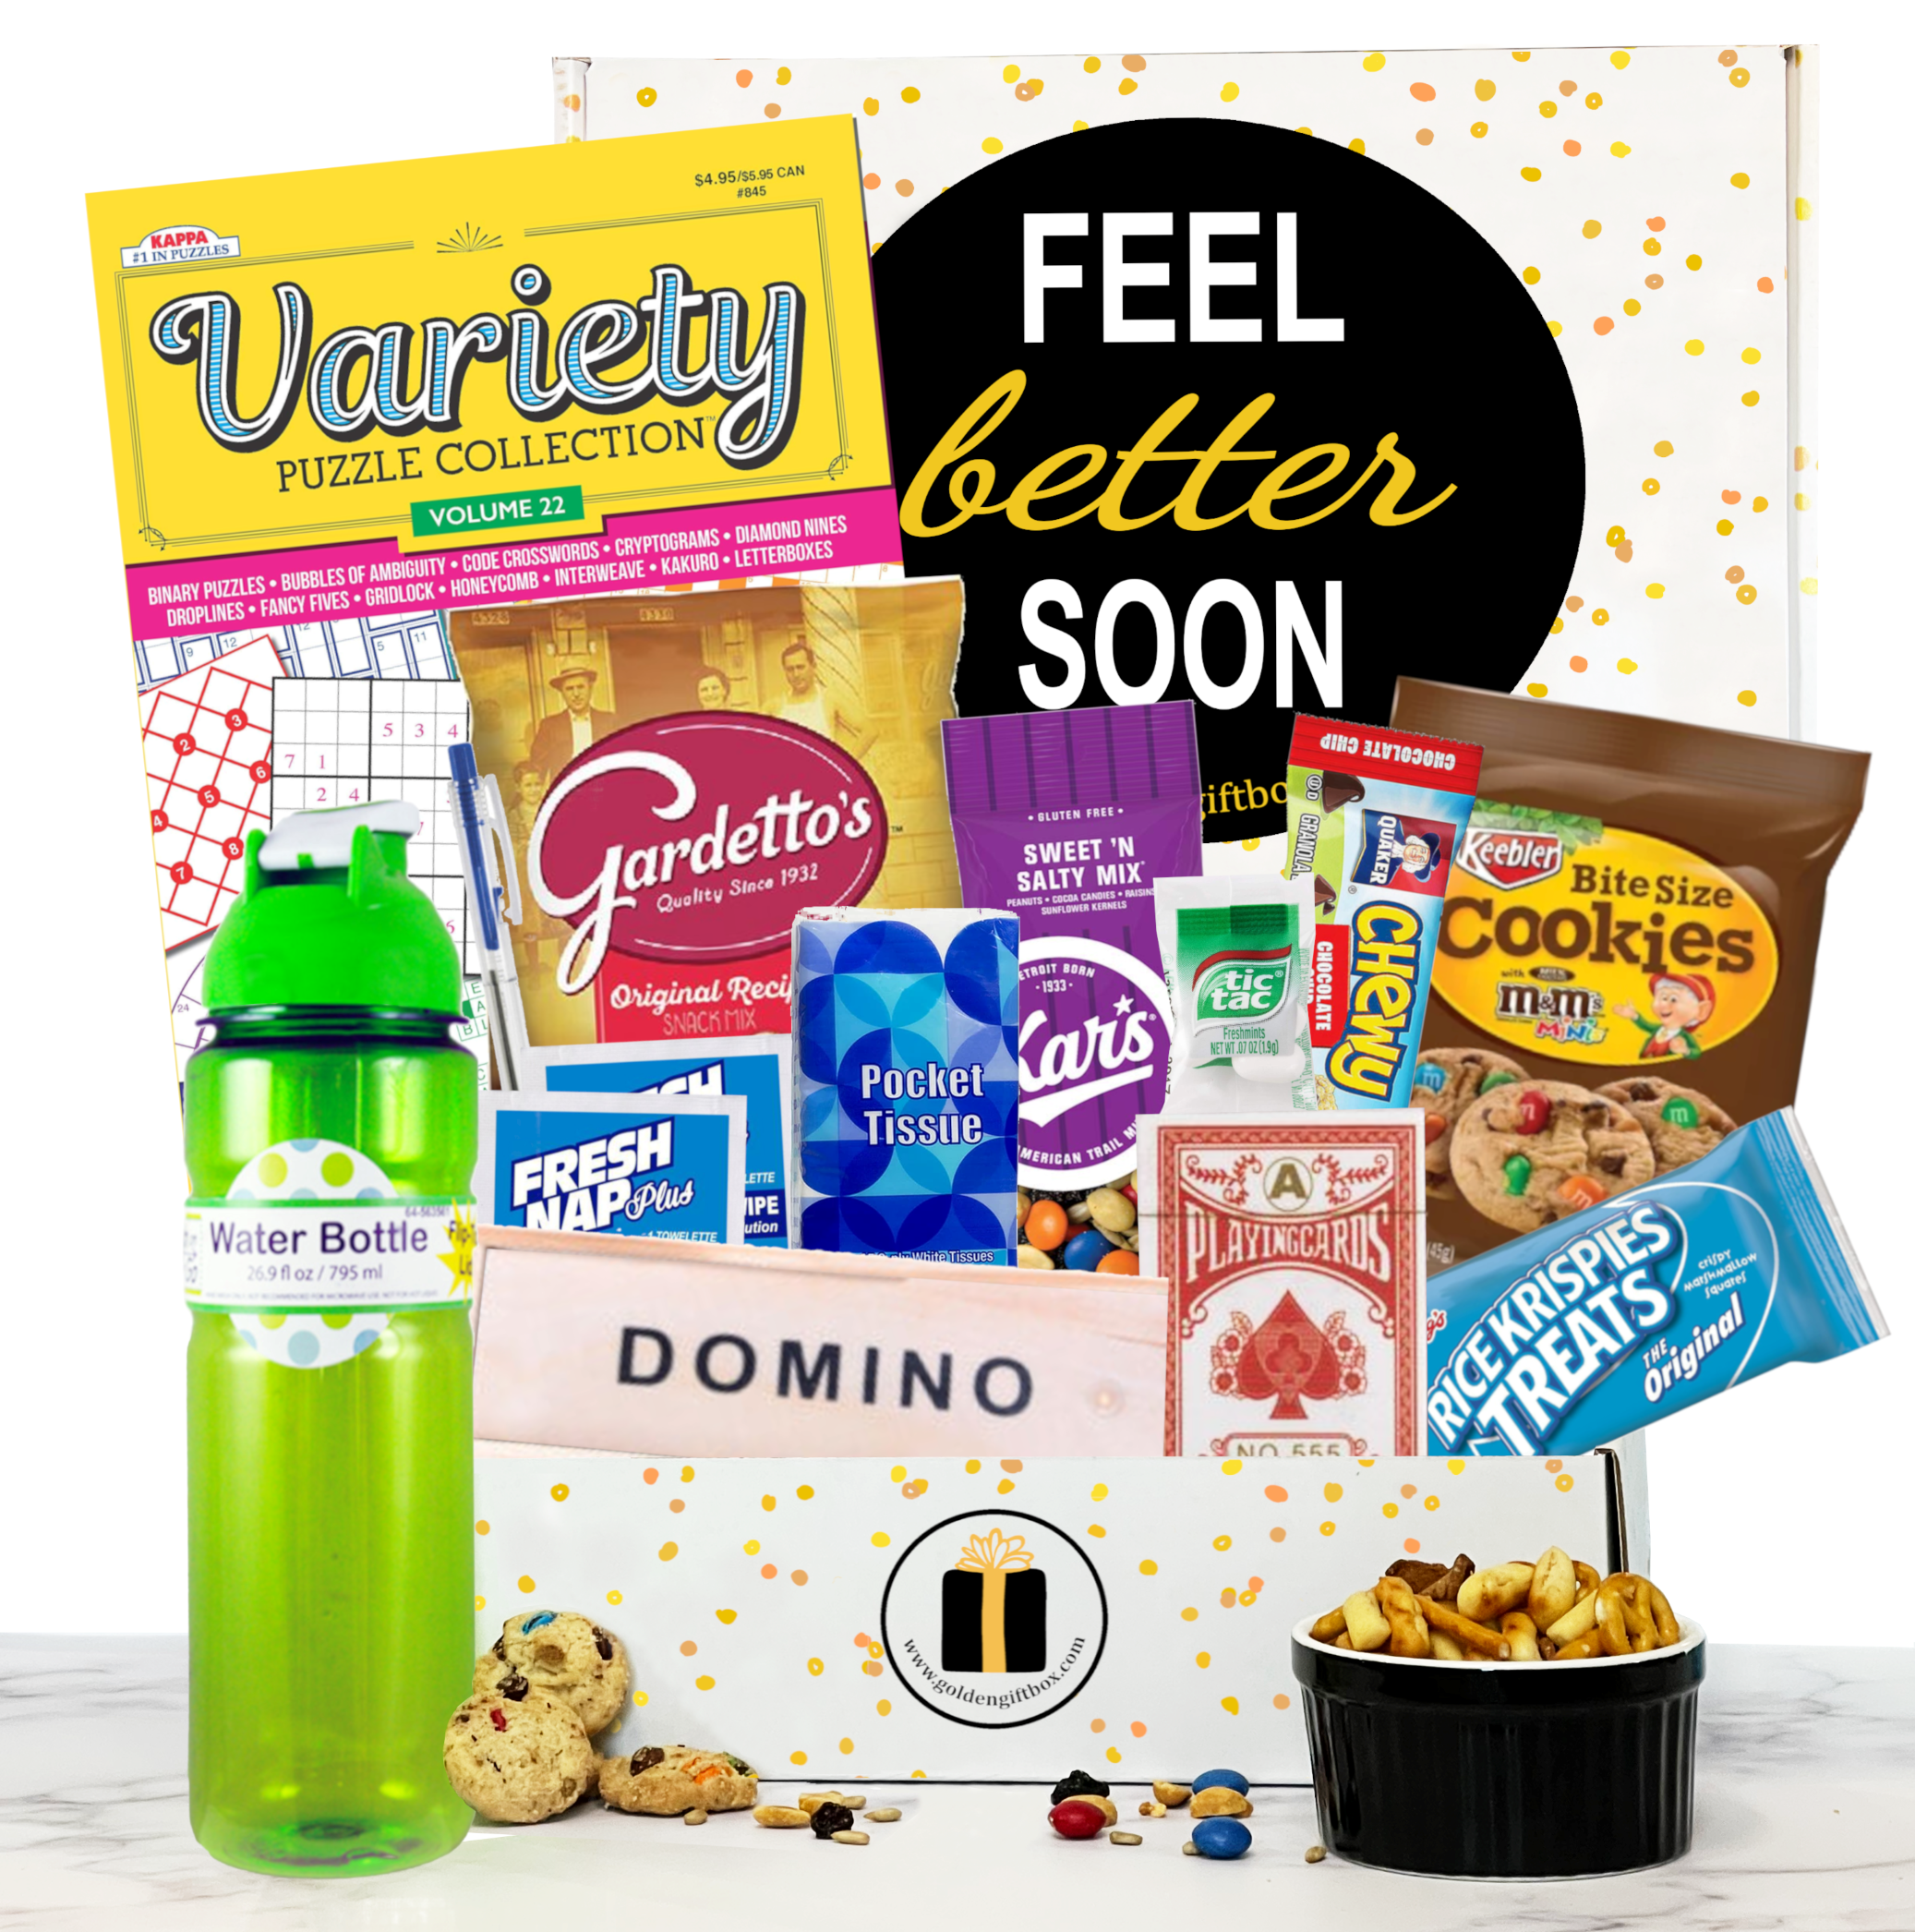 Get Well Soon Gifts for Women - Feel Better Gifts for Women After